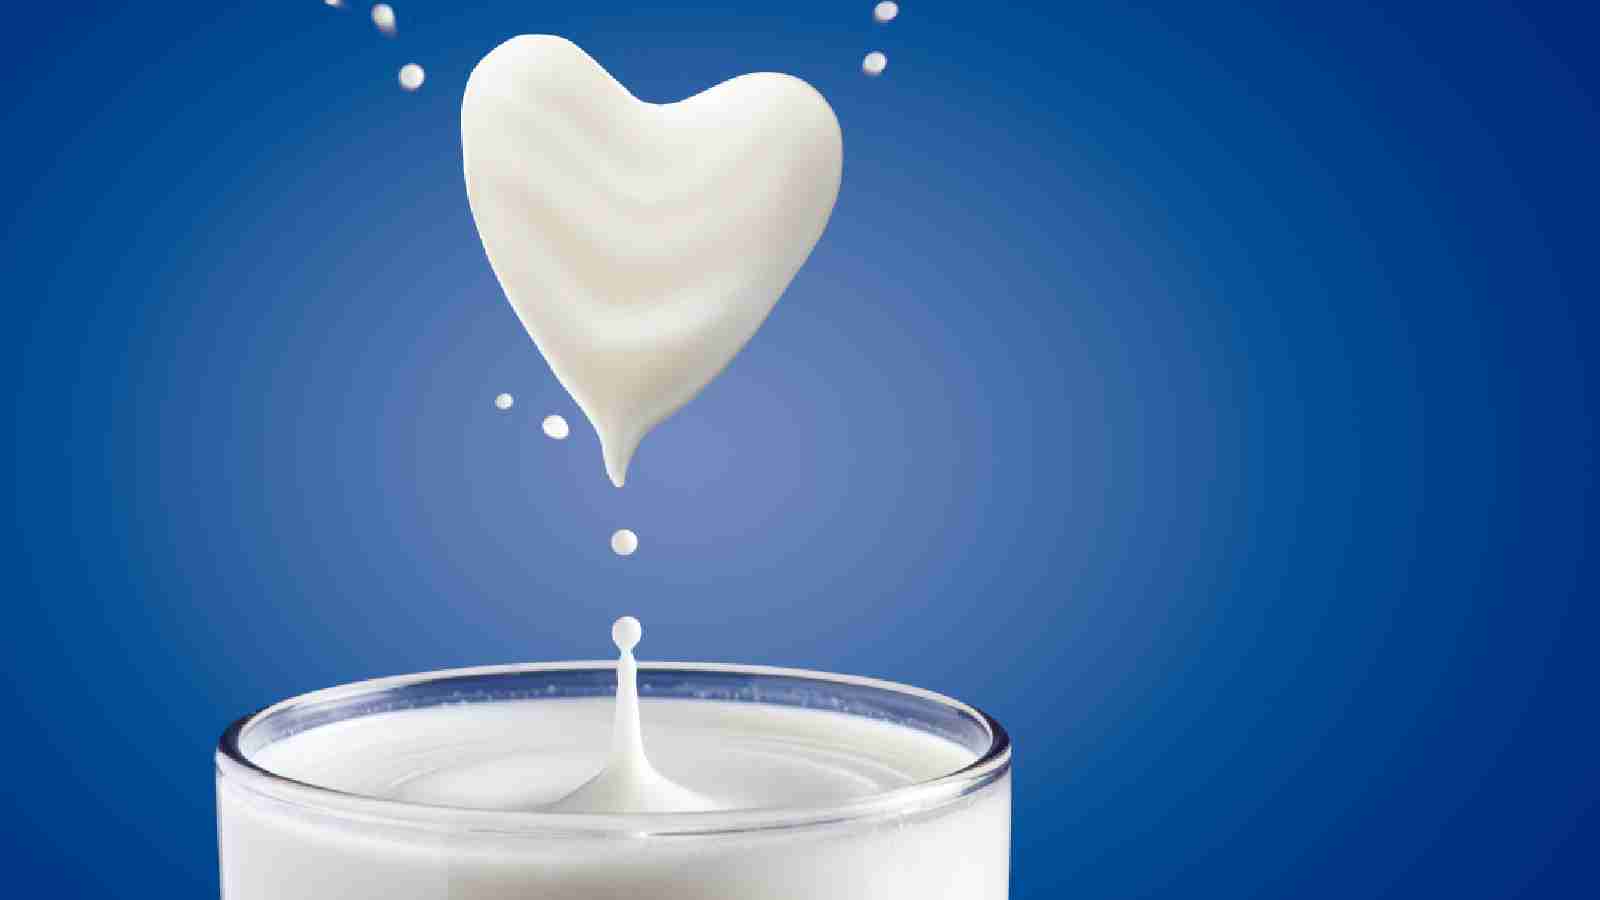 Calcium is most important for a child's healthy growth. Include these 5 foods in your diet.